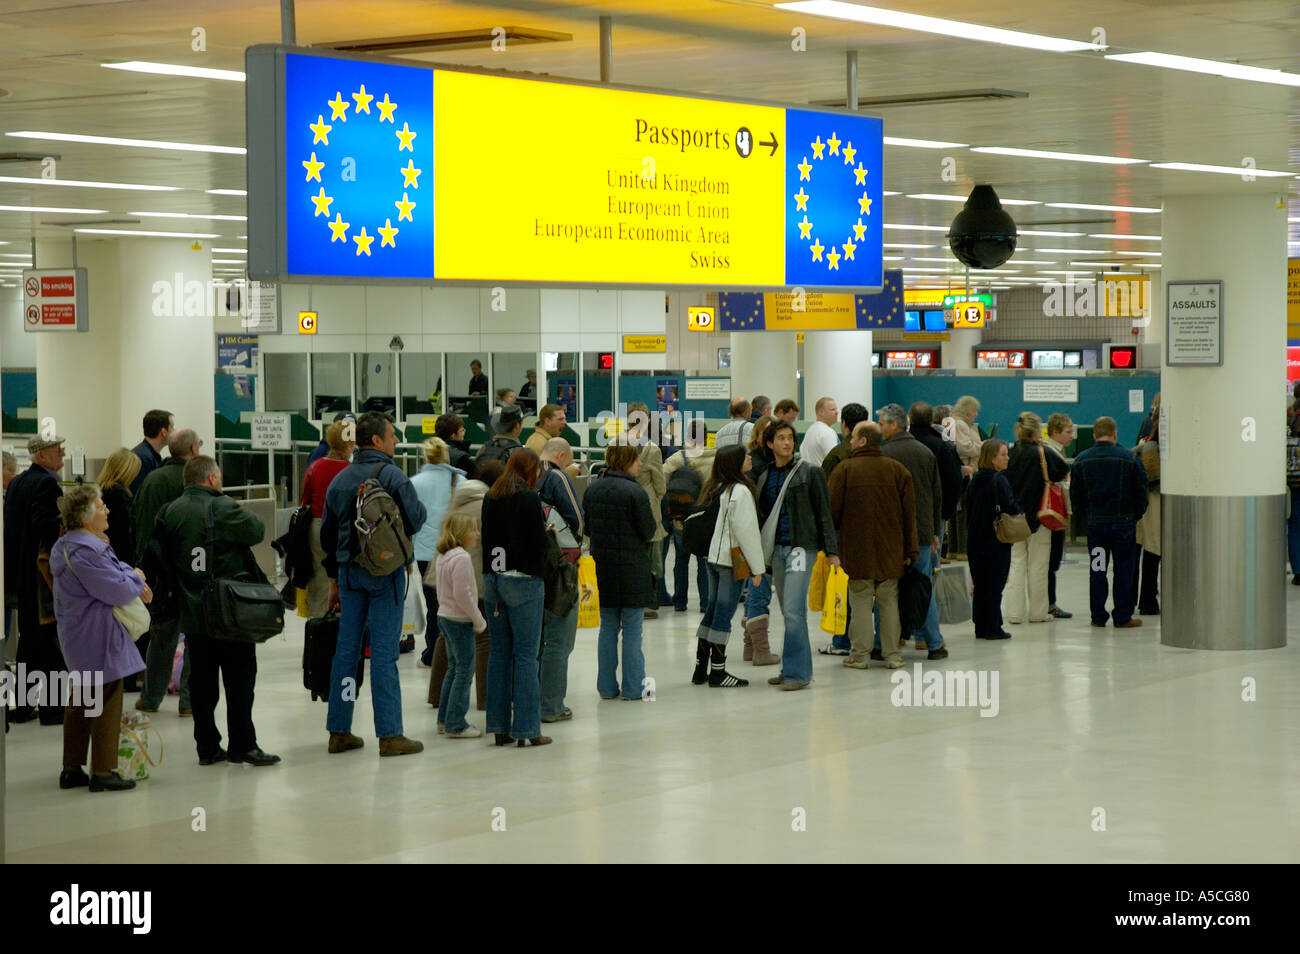 People in the queue for European passport holders at a British airport Stock Photo